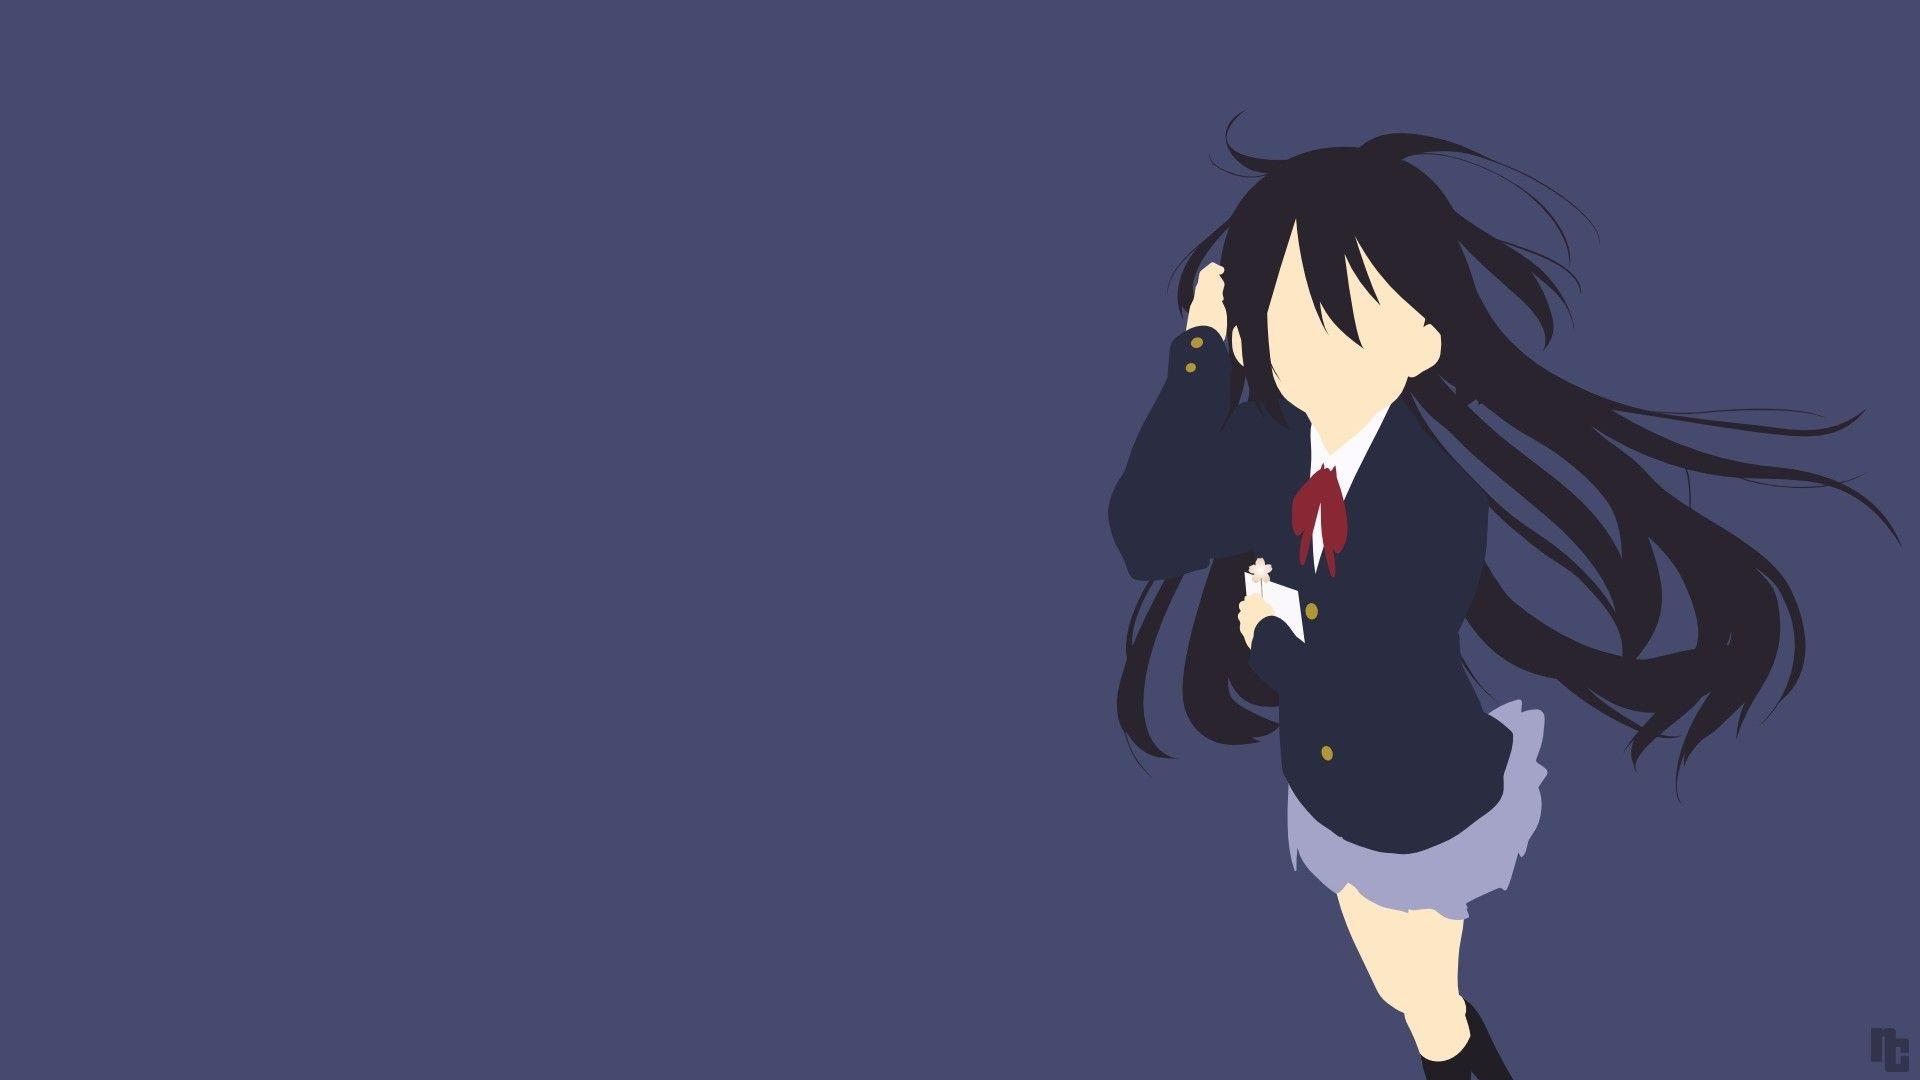 Minimalist Anime Wallpaper background picture